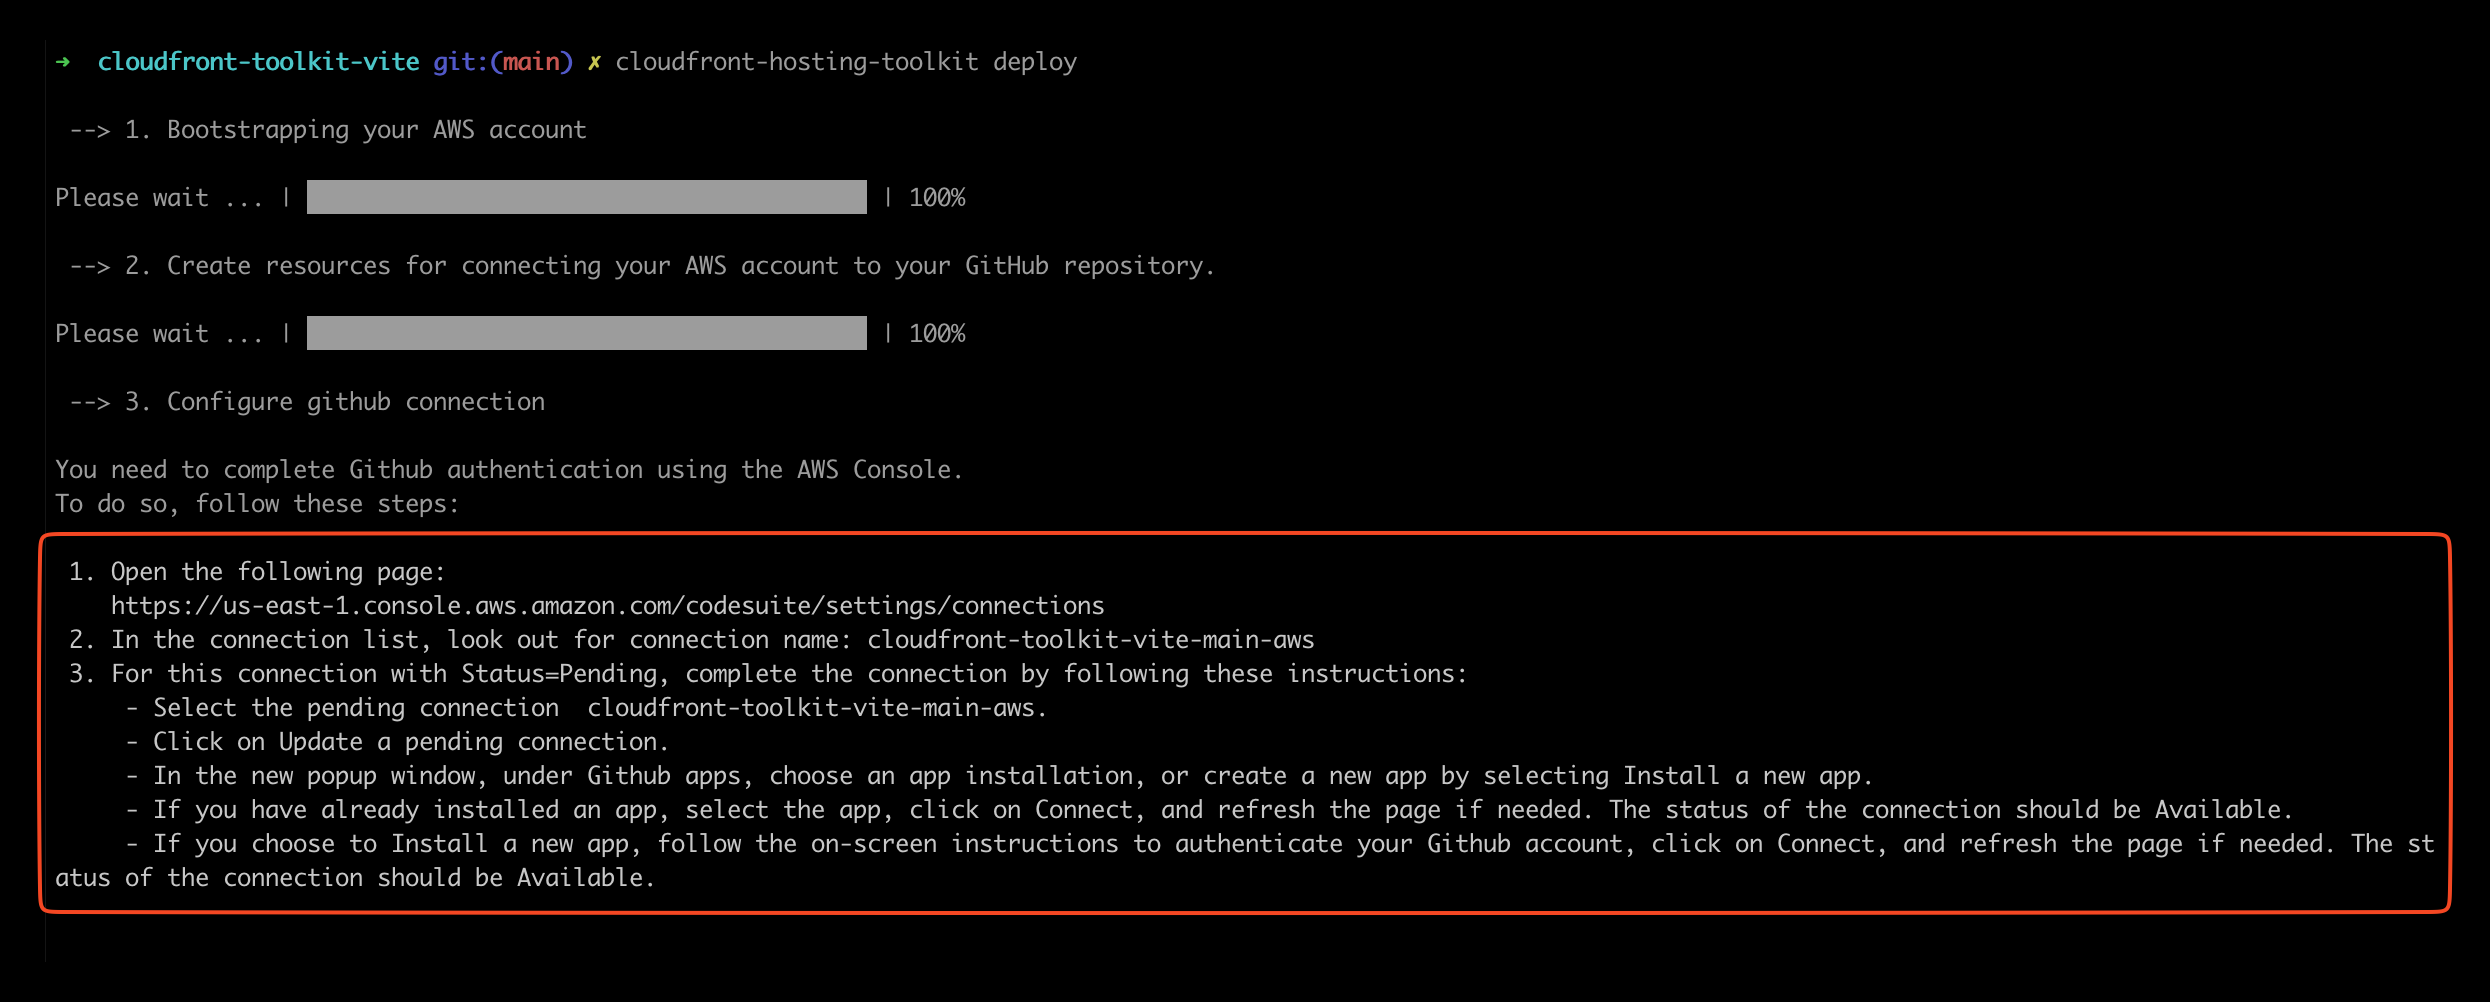 A terminal window showing the deployment process of the "cloudfront-hosting-toolkit" with steps for bootstrapping an AWS account, creating resources, and configuring a GitHub connection. Instructions for completing GitHub authentication using the AWS Console are highlighted in a red box.